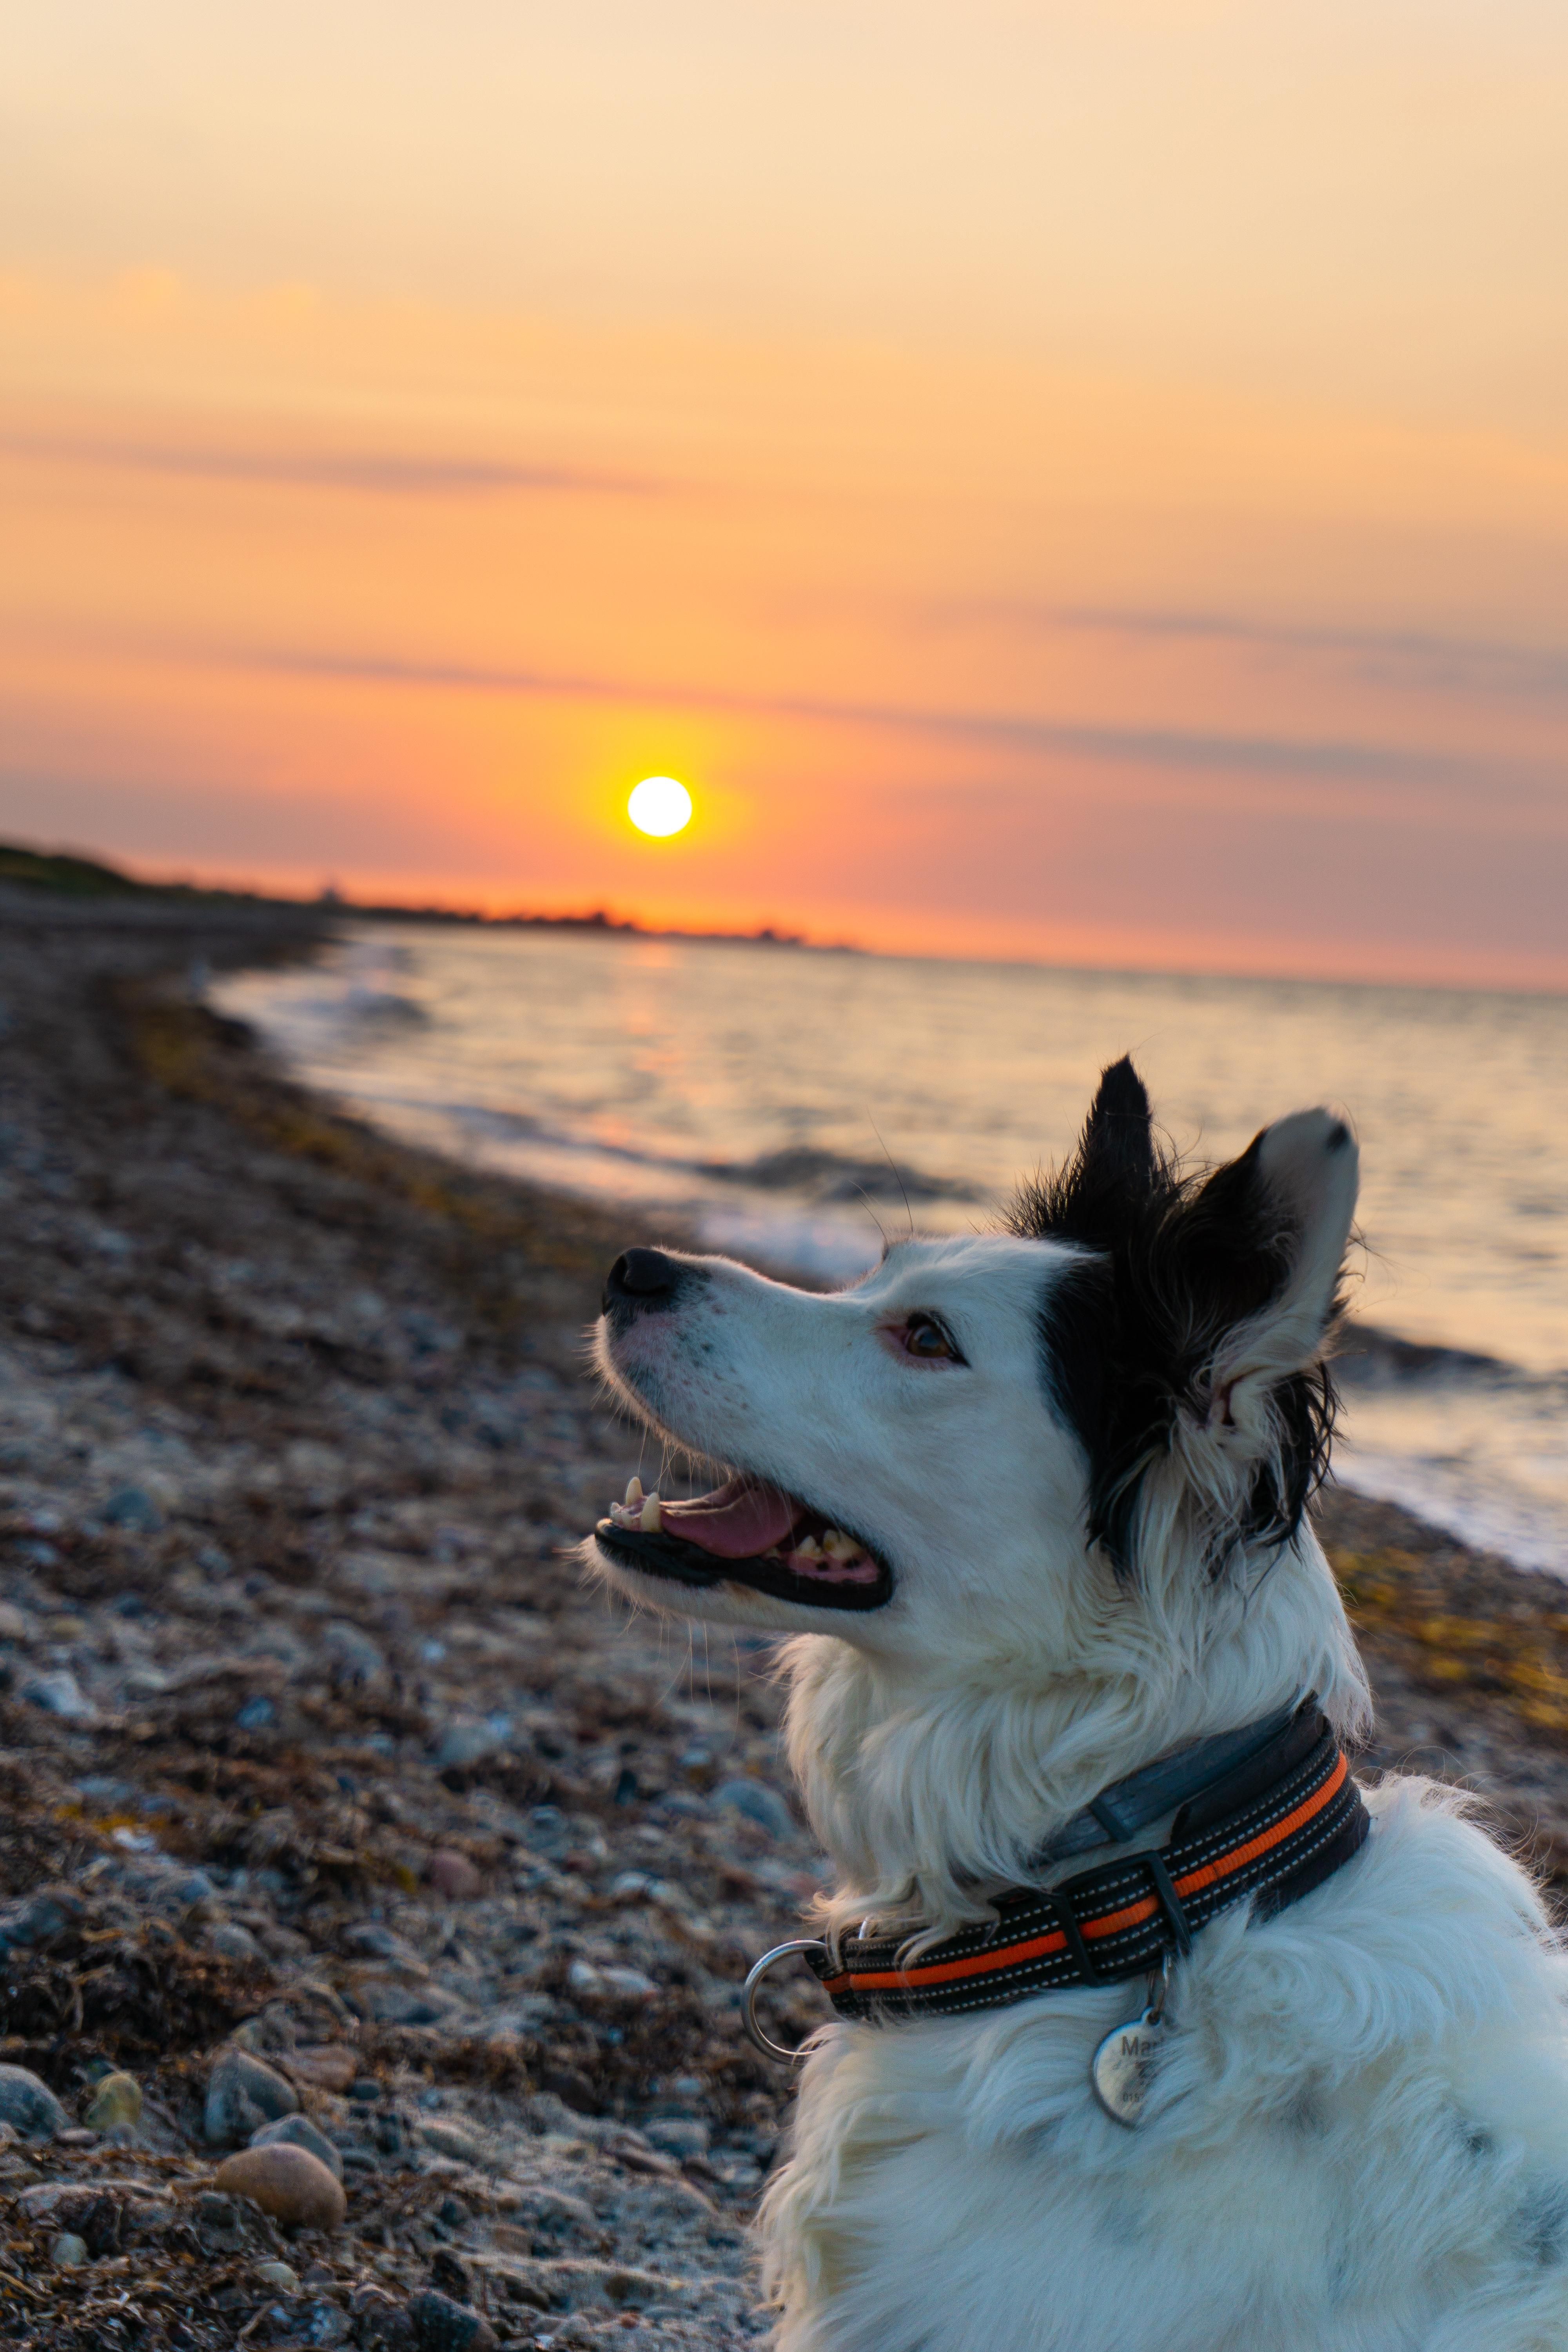 My dog posing at the beach in front of a sunset. #dogpicture #dogs #aww #cuteanimals #dogsoftwitter #dog #cute. Dog beach, Dog photohoot, Dog poses